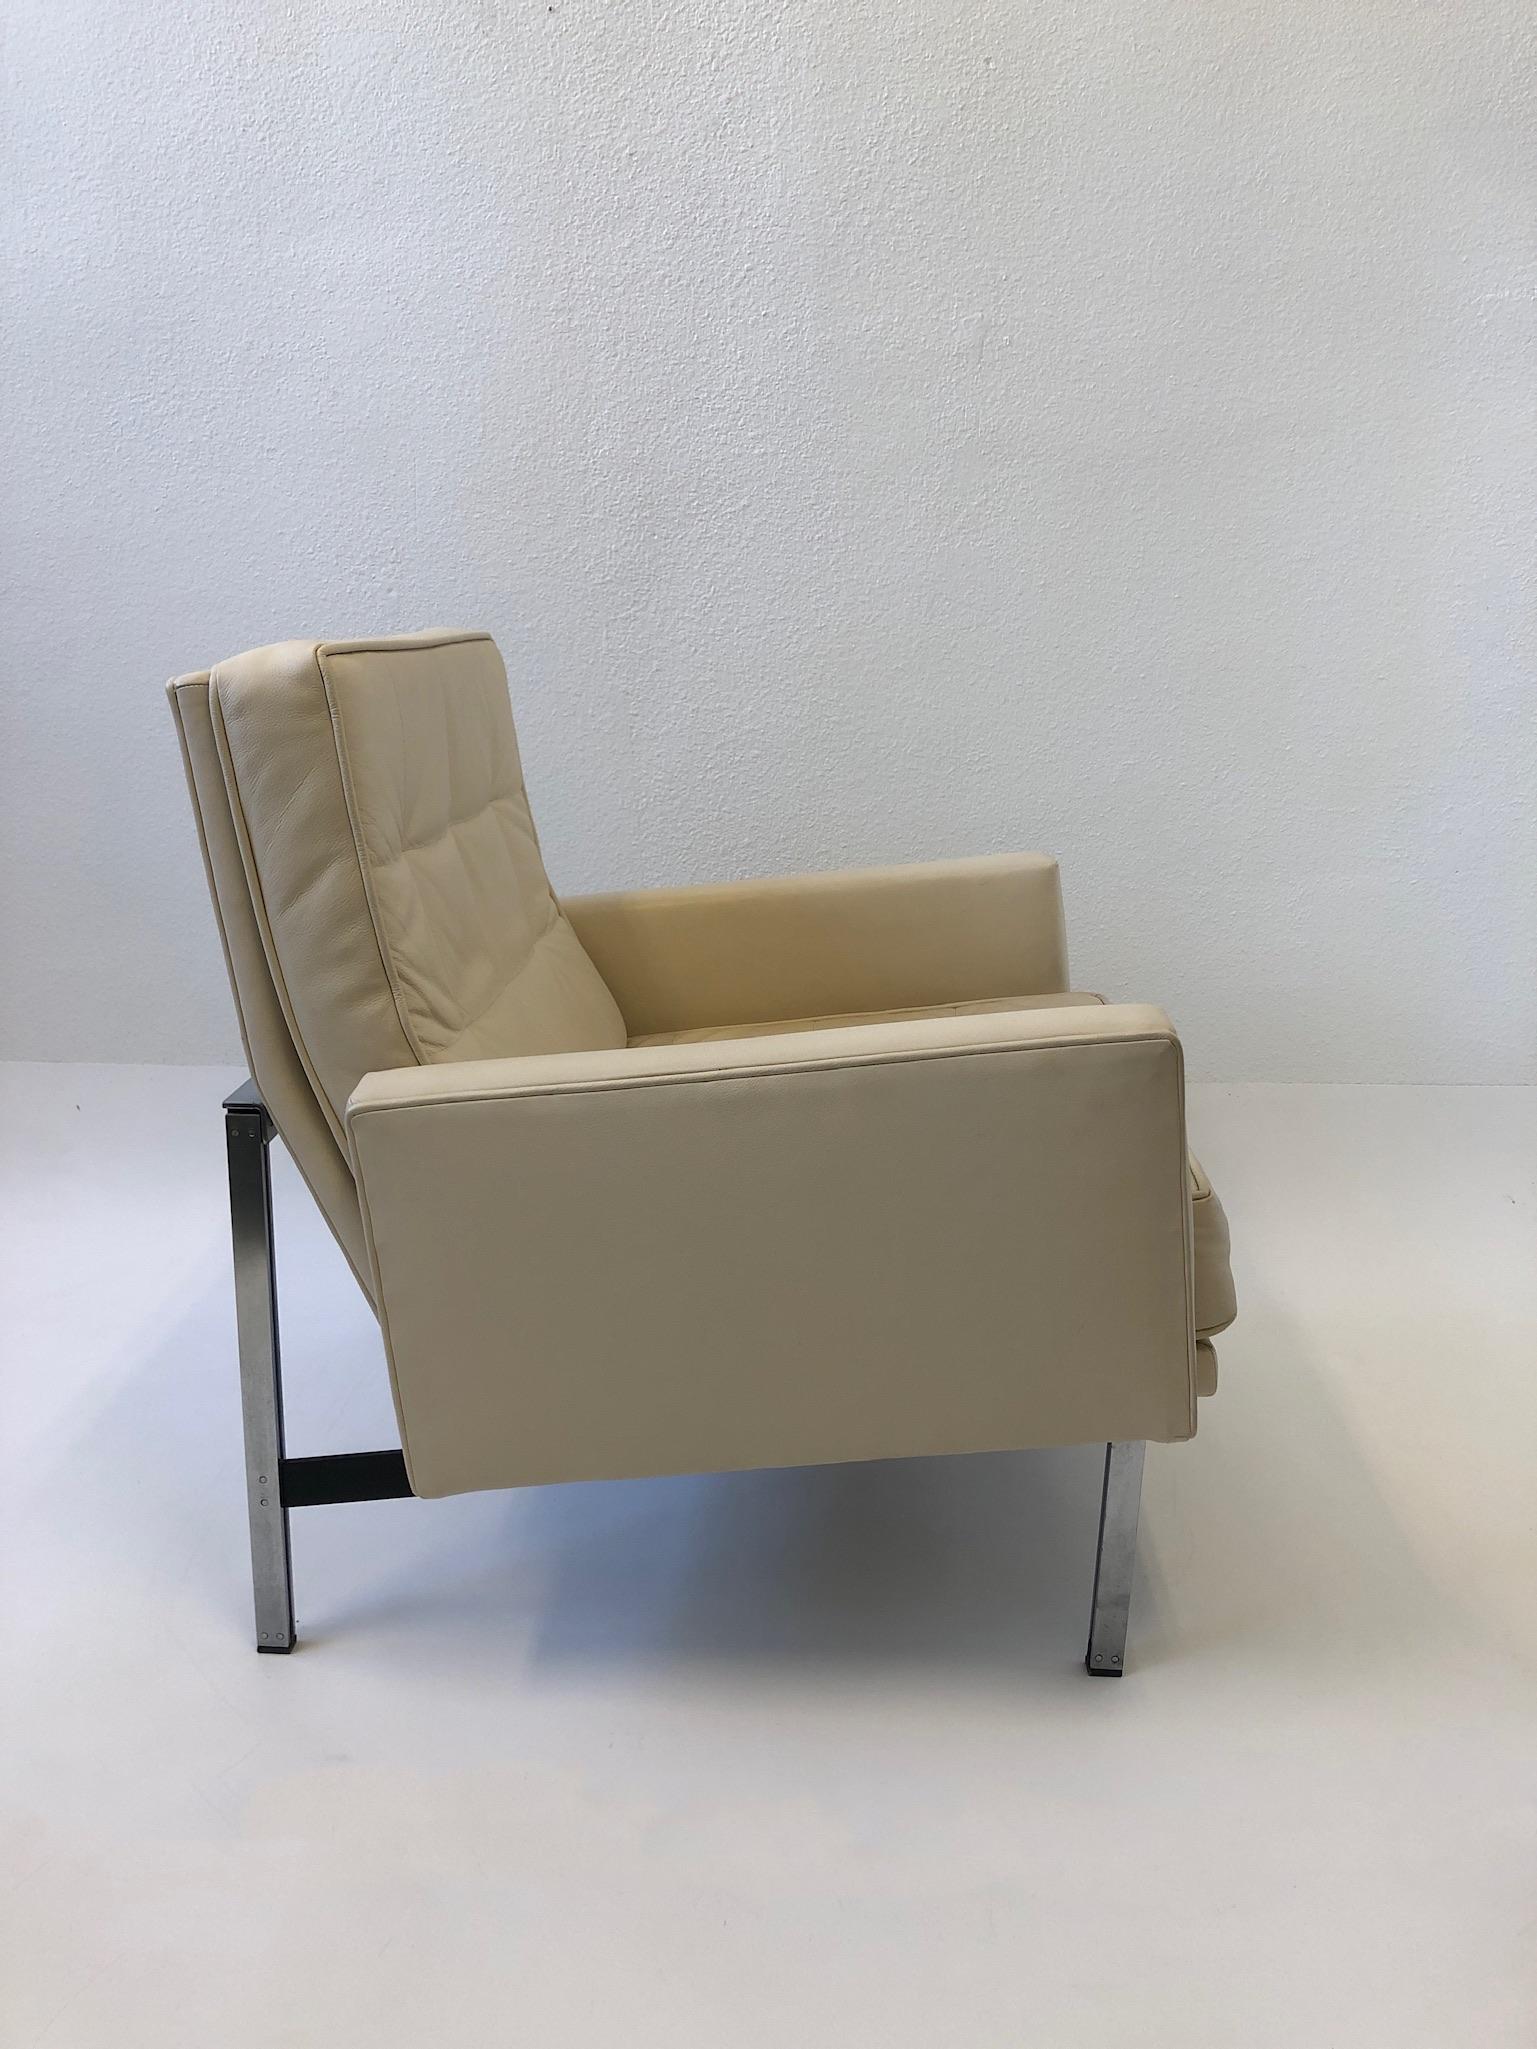 American Pair of off White Leather and Stainless Steel Lounge Chairs by Florence Knoll For Sale